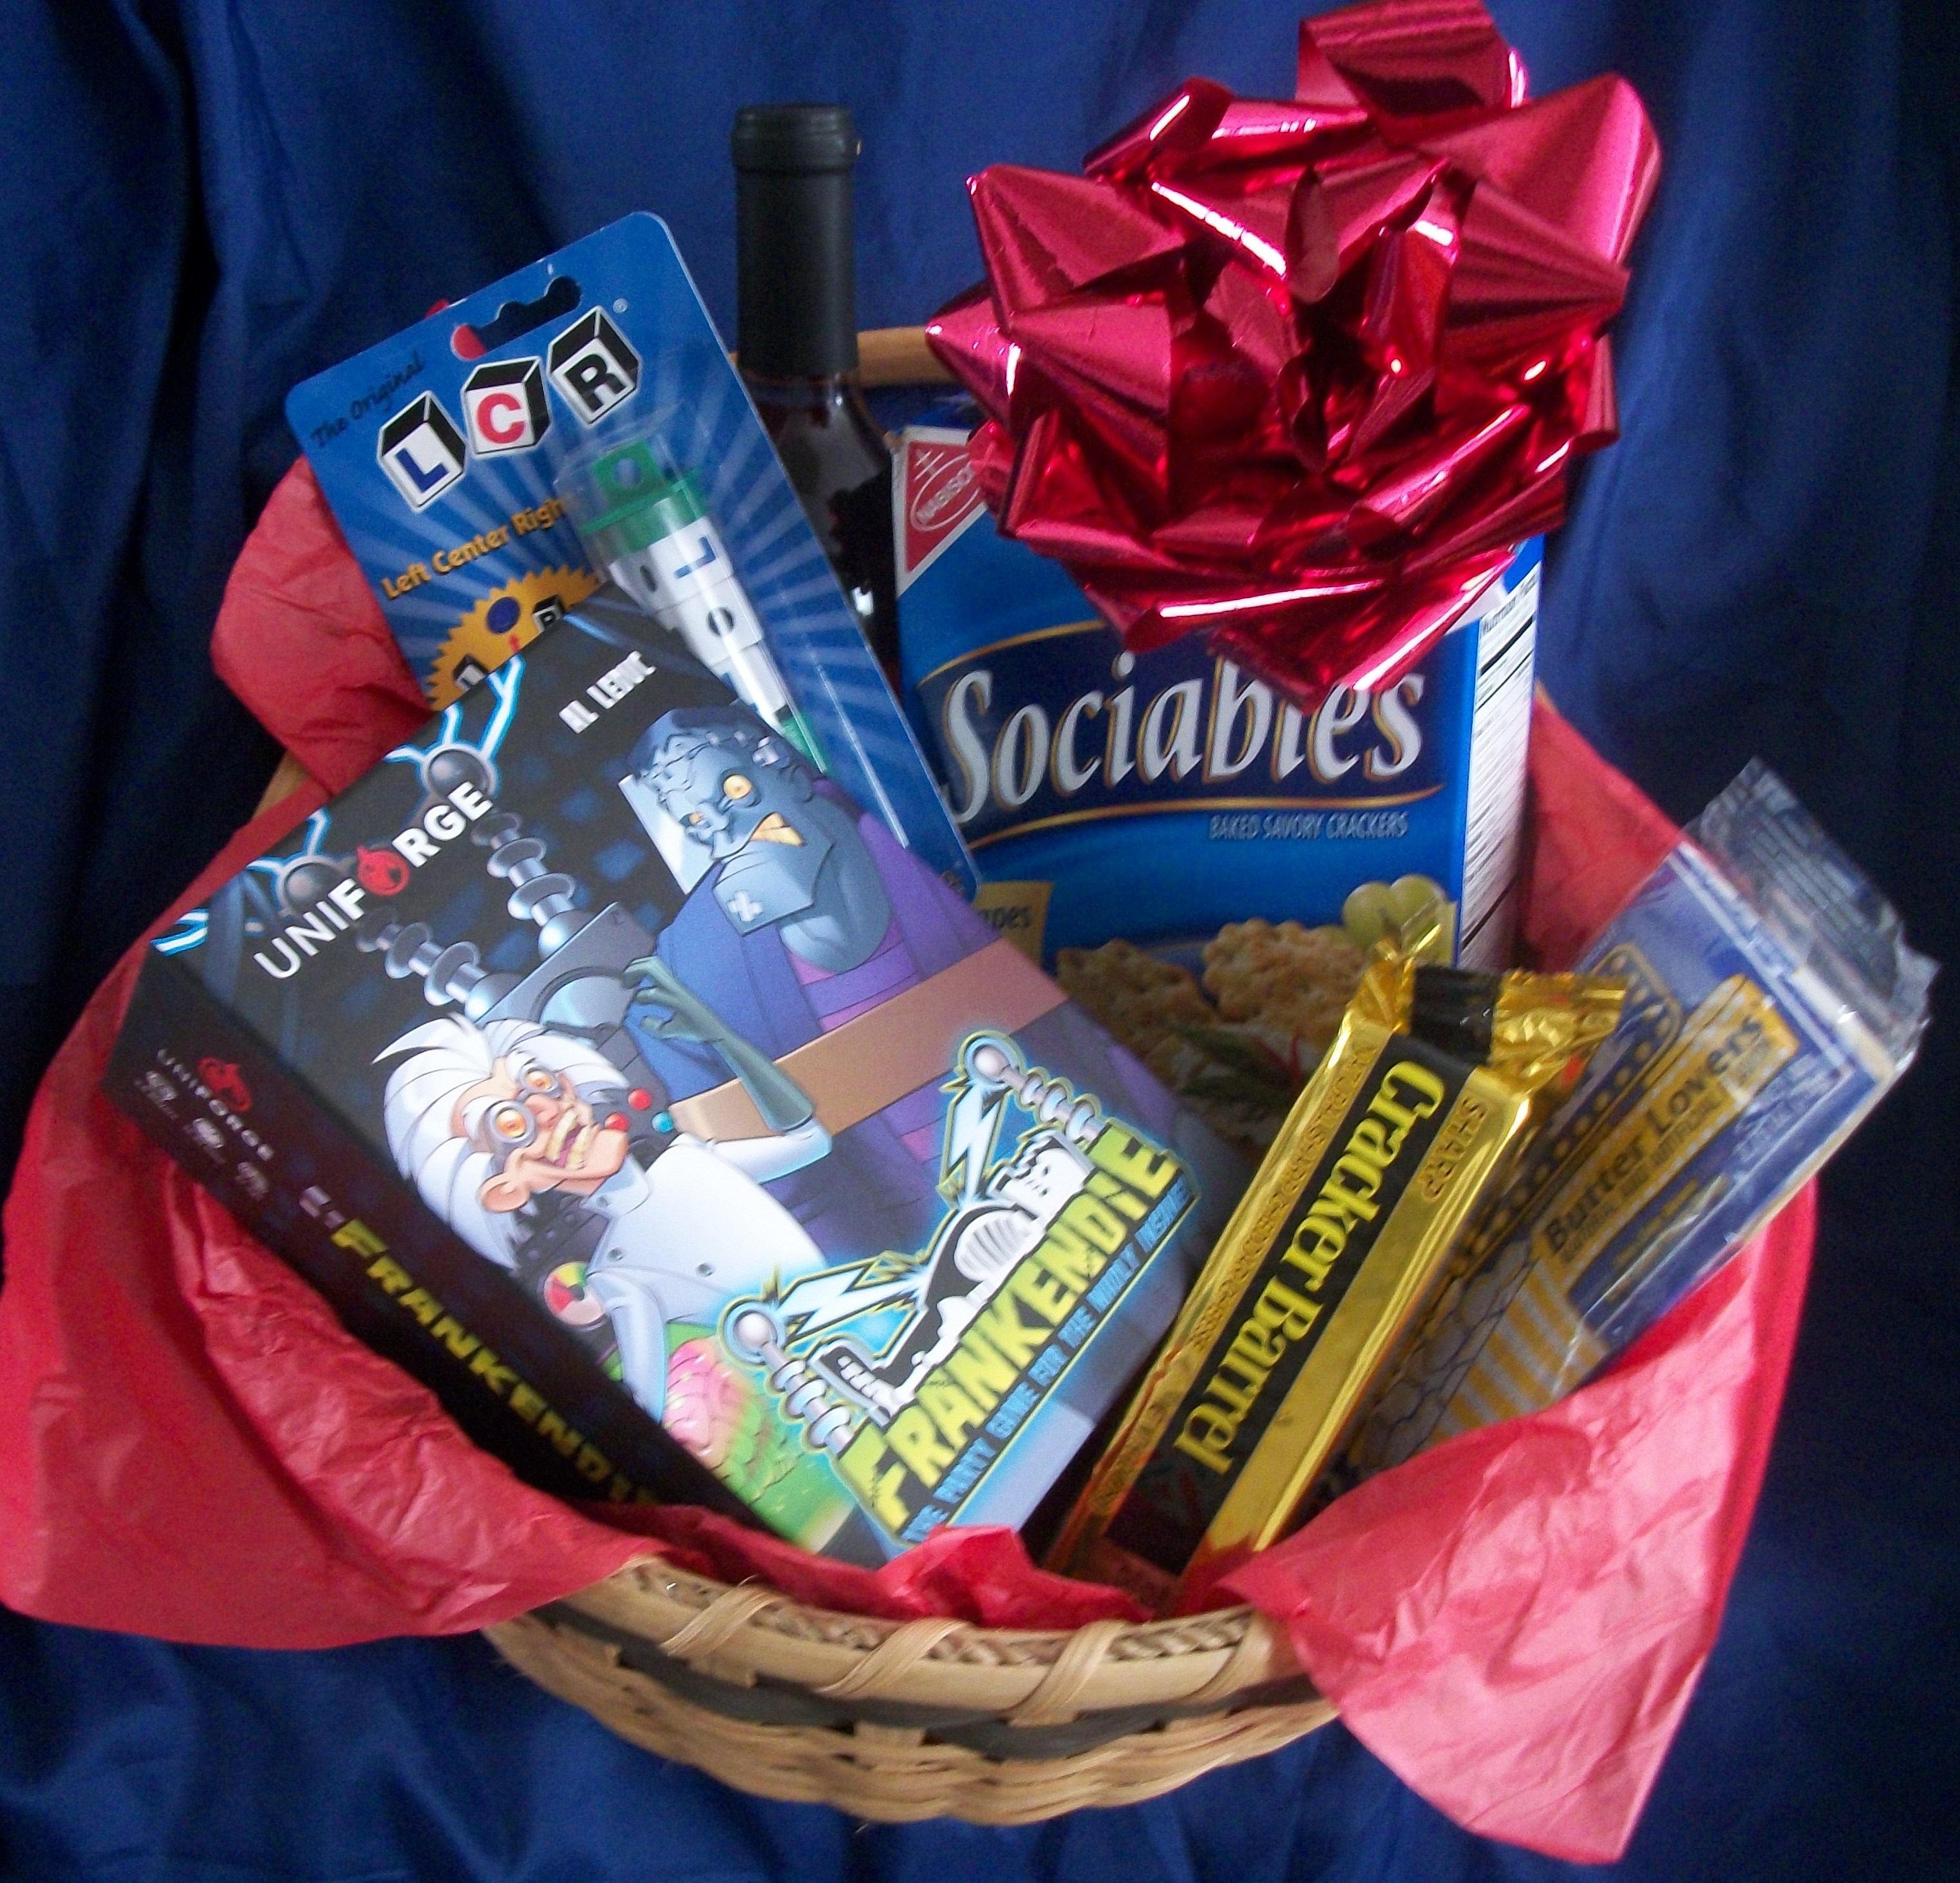 New Year’s Eve Fun and Games Gift Basket